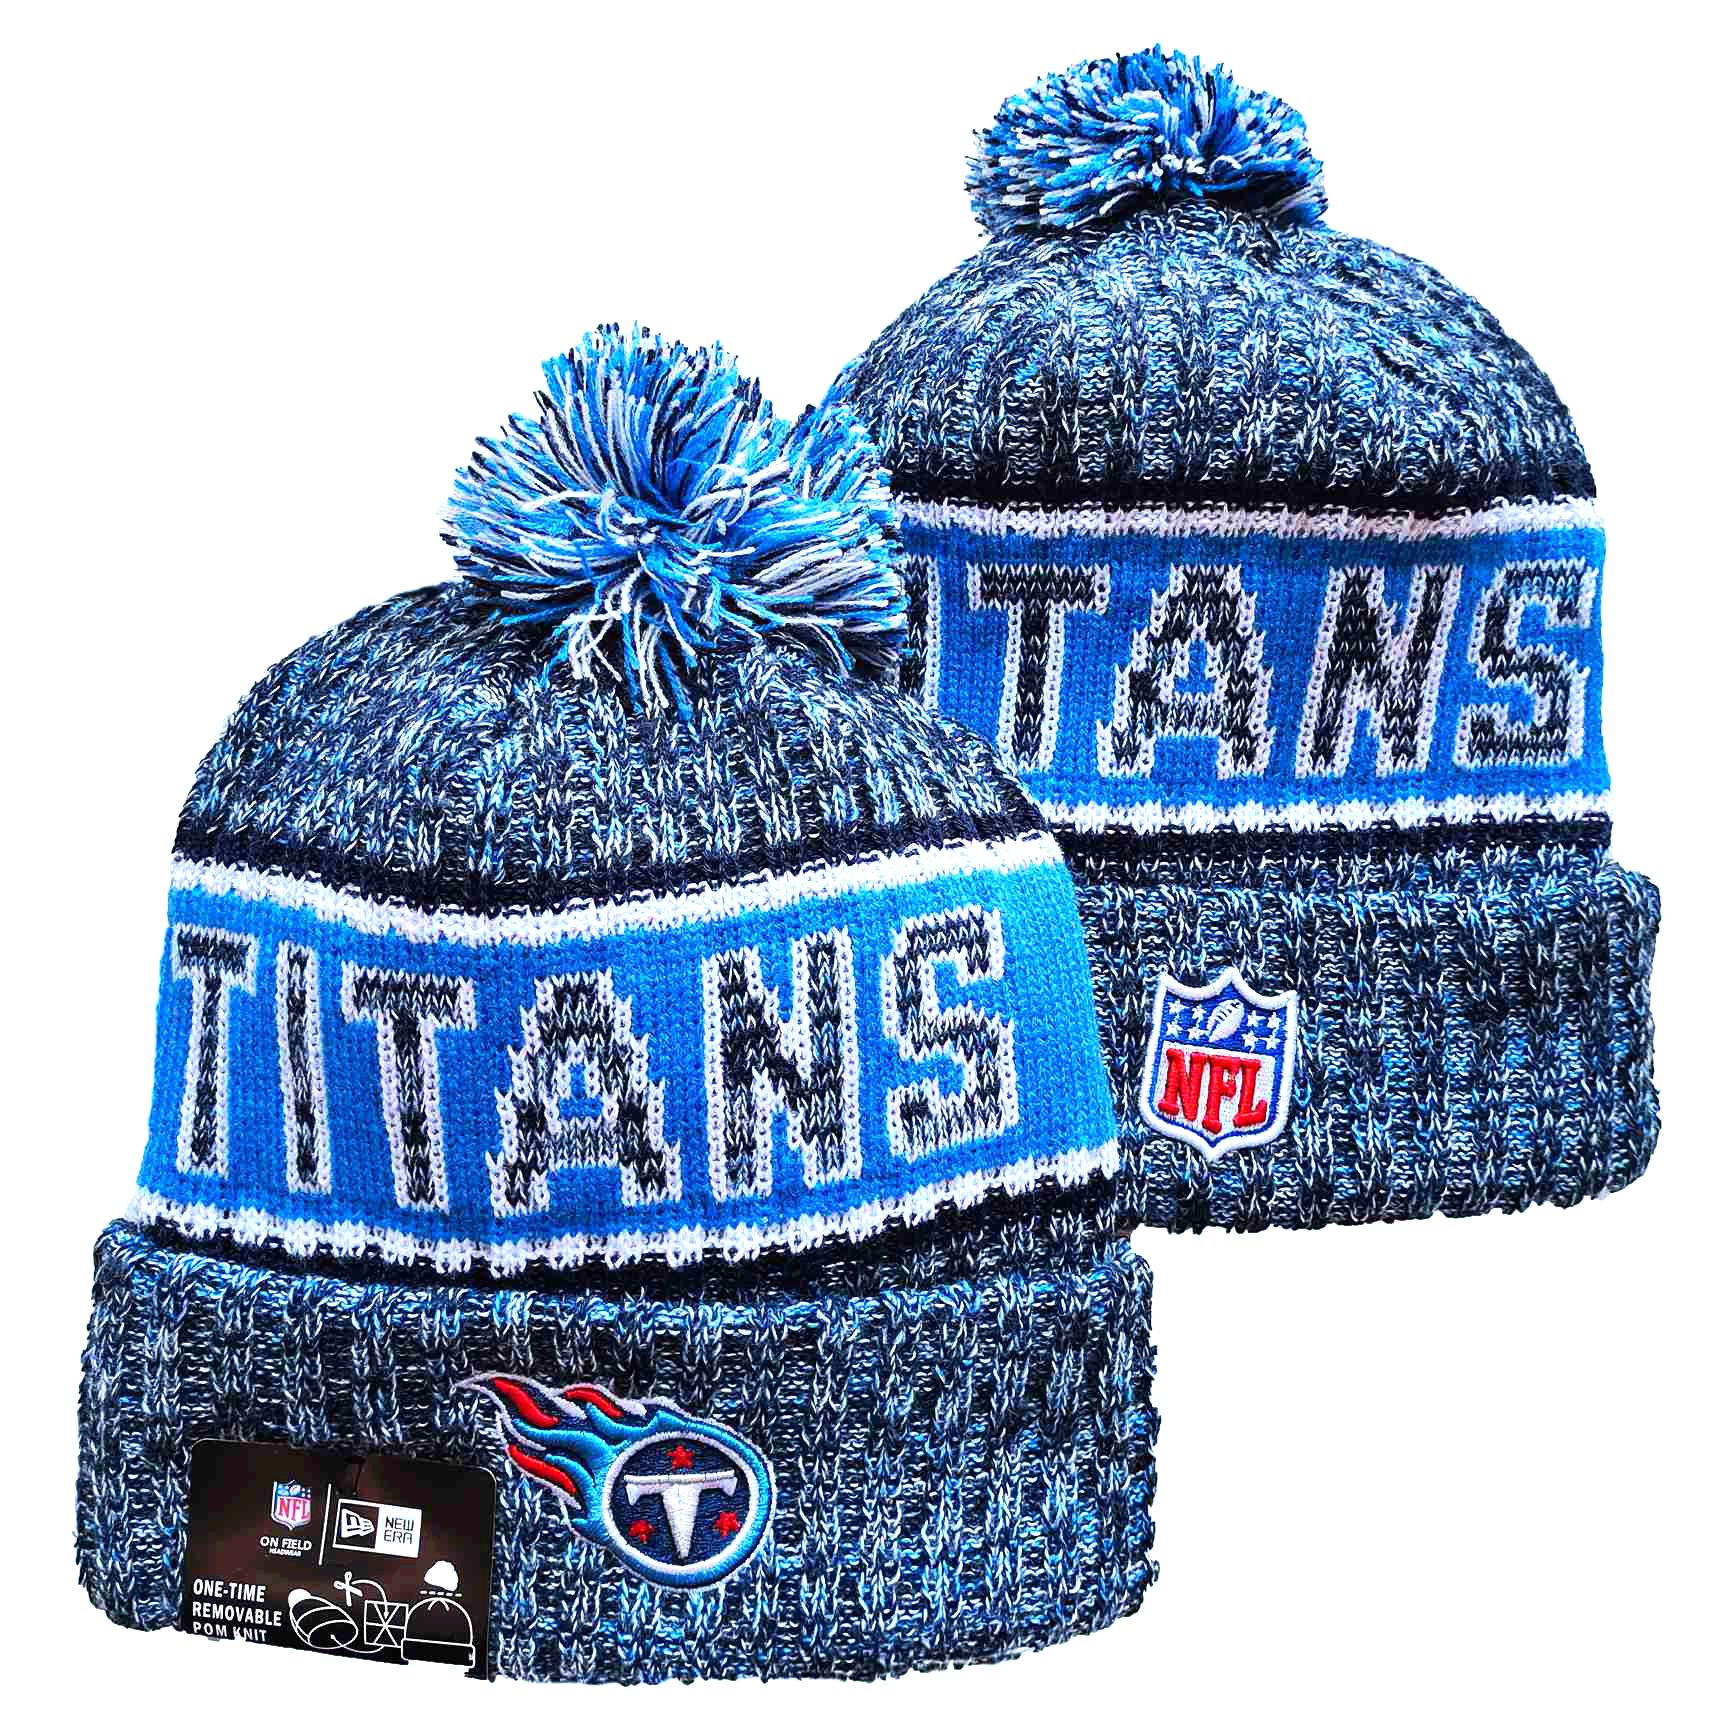 NFL Tennessee Titans Beanies Knit Hats-YD1319